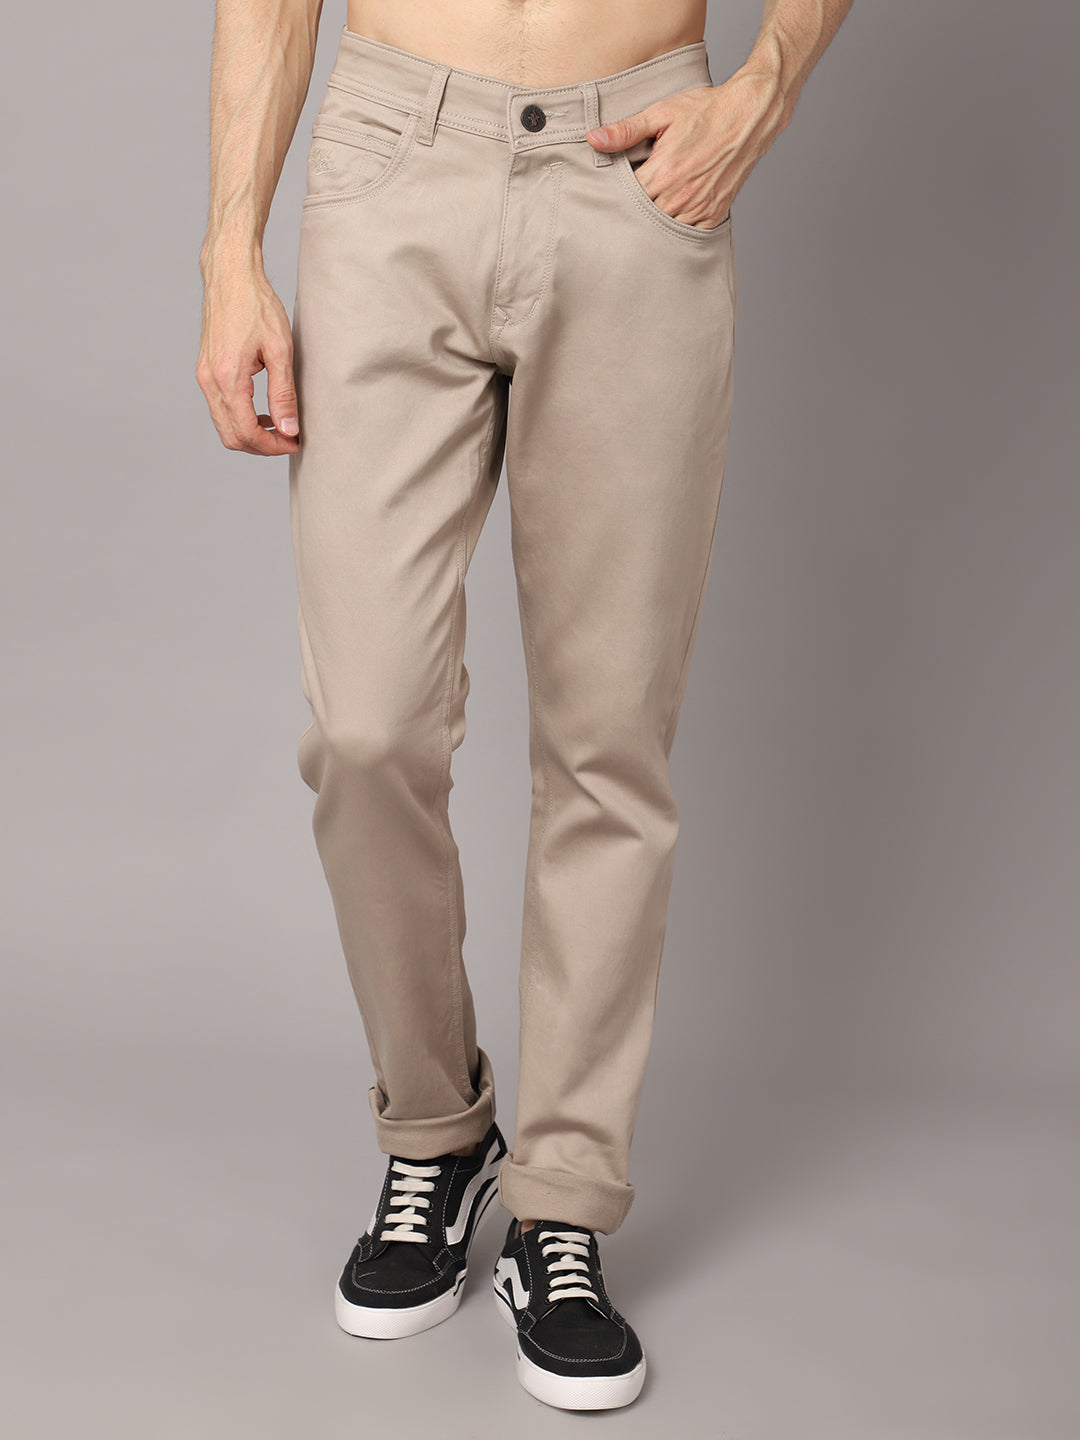 Cantabil Men Cotton Solid Khaki Lower Trackpant (CML4001_Khaki_XL) :  Amazon.in: Clothing & Accessories